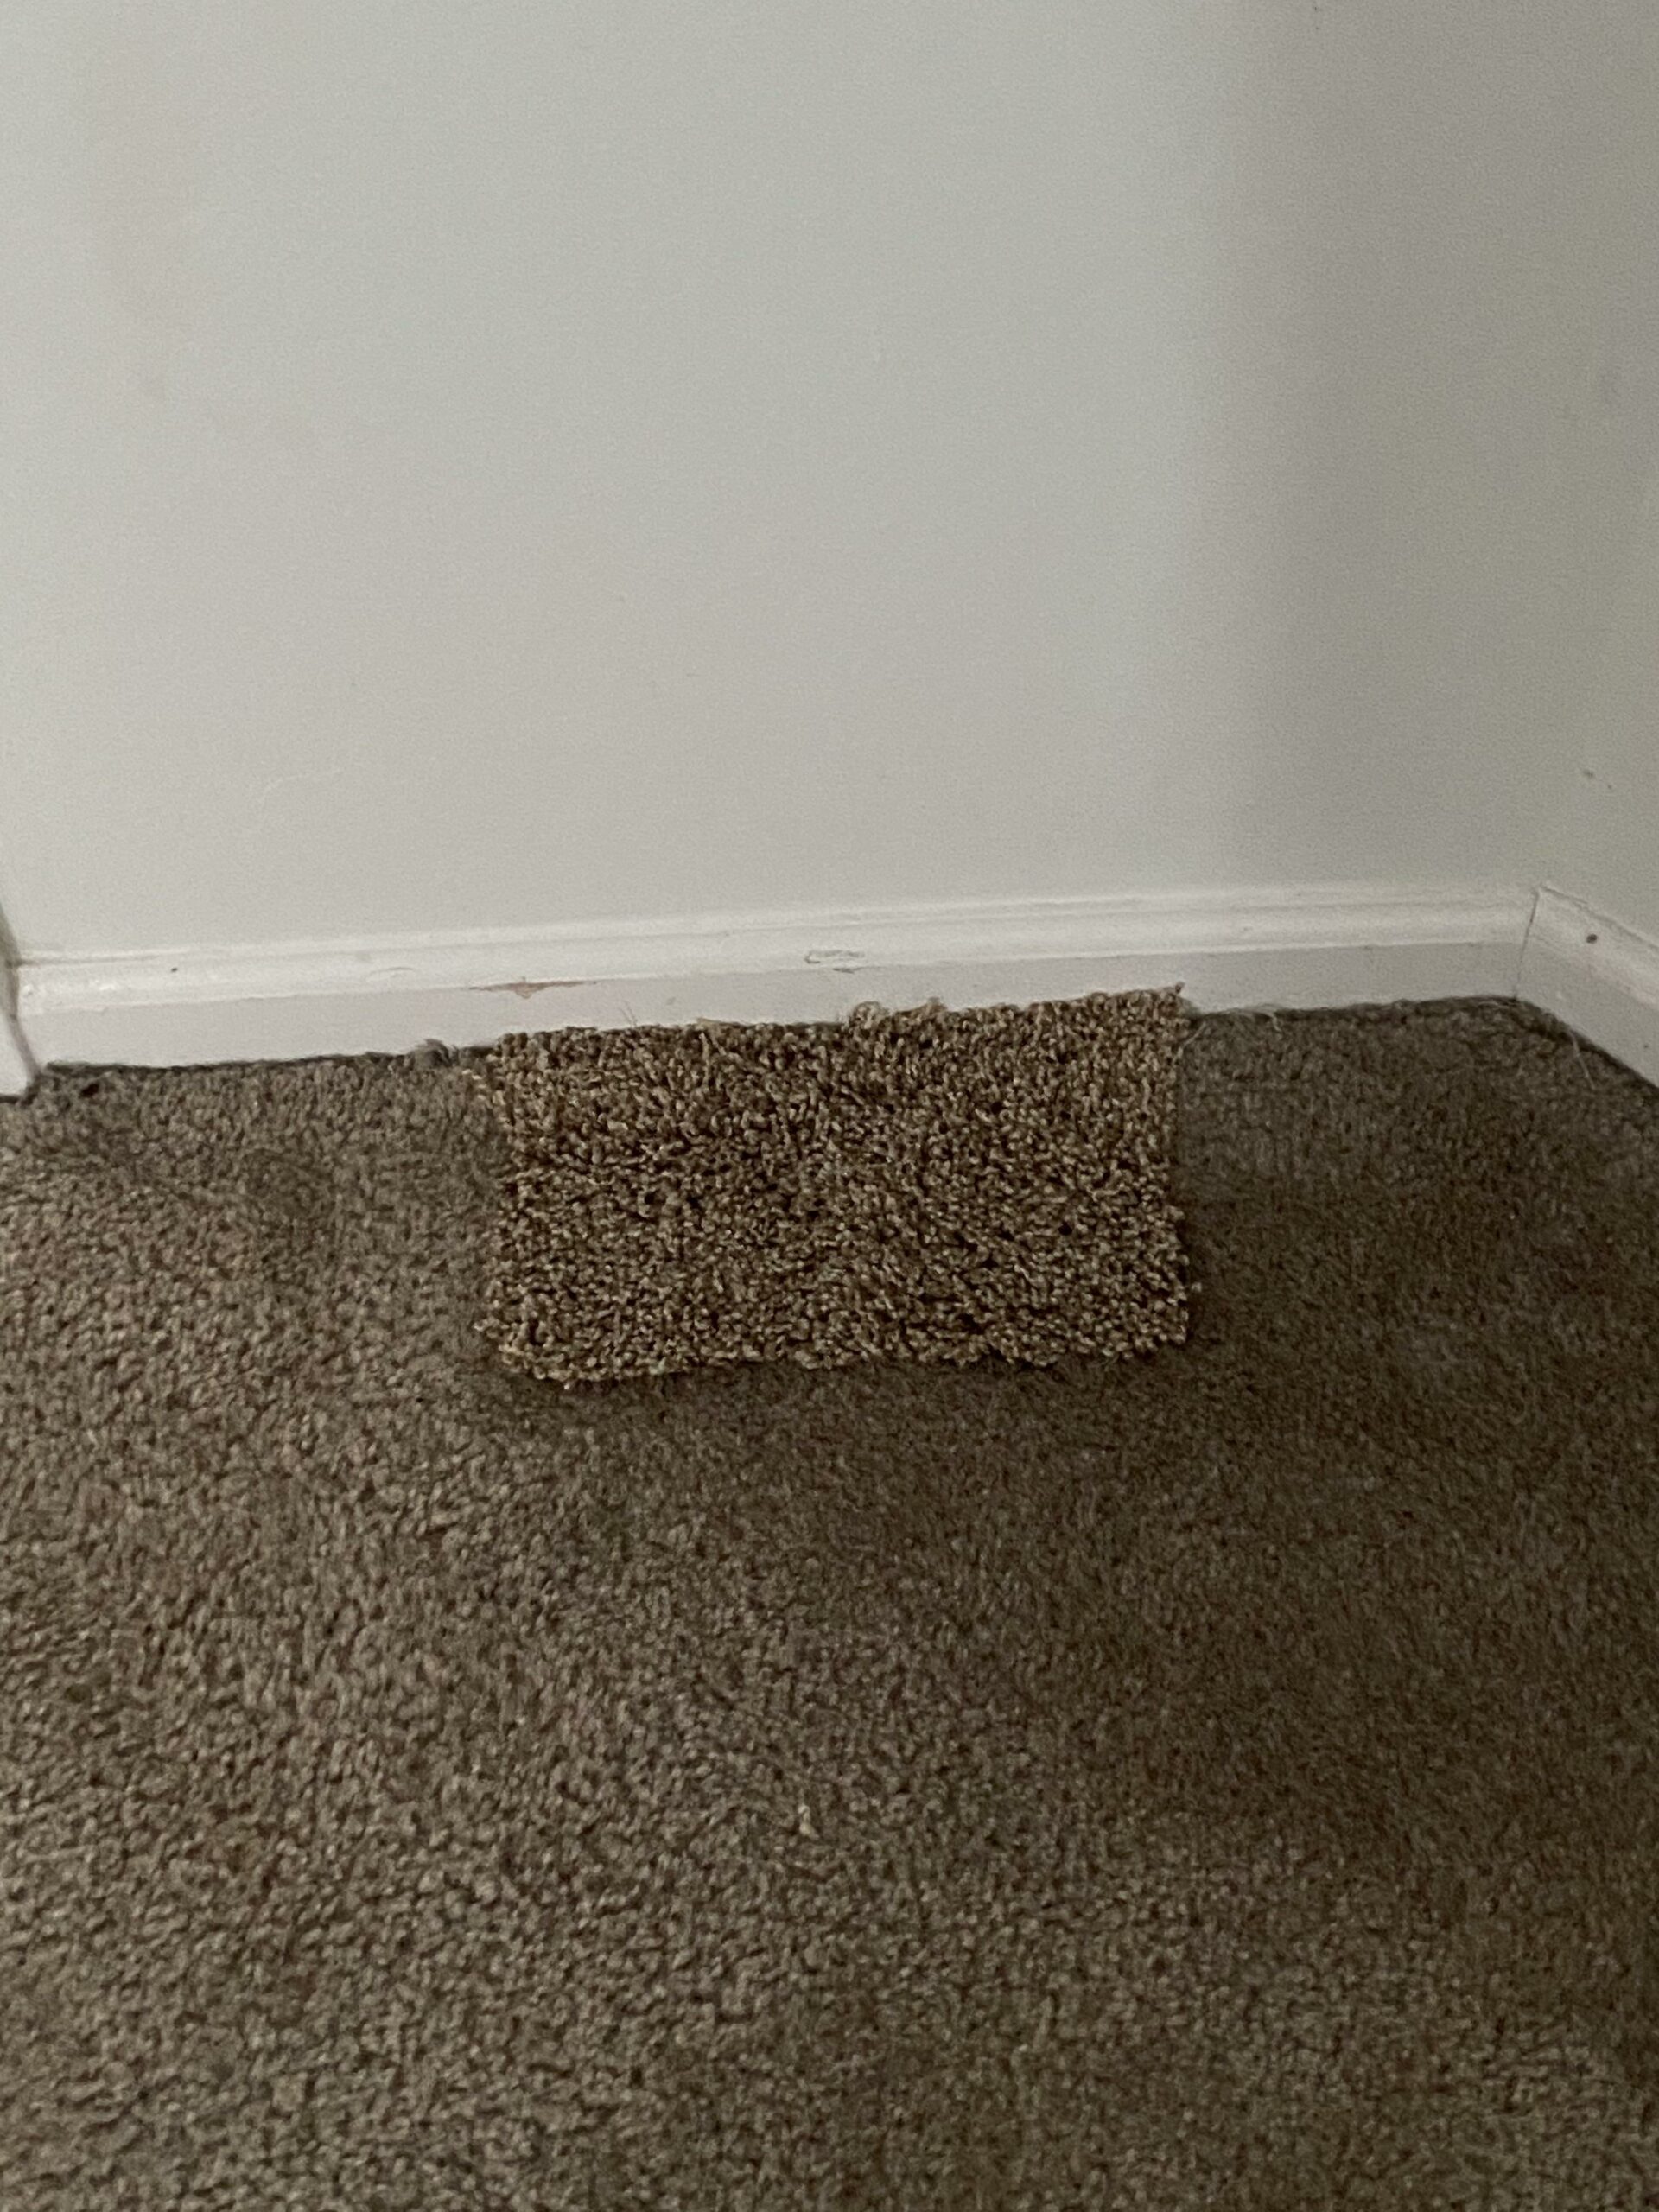 infuriating landlords - new home carpet